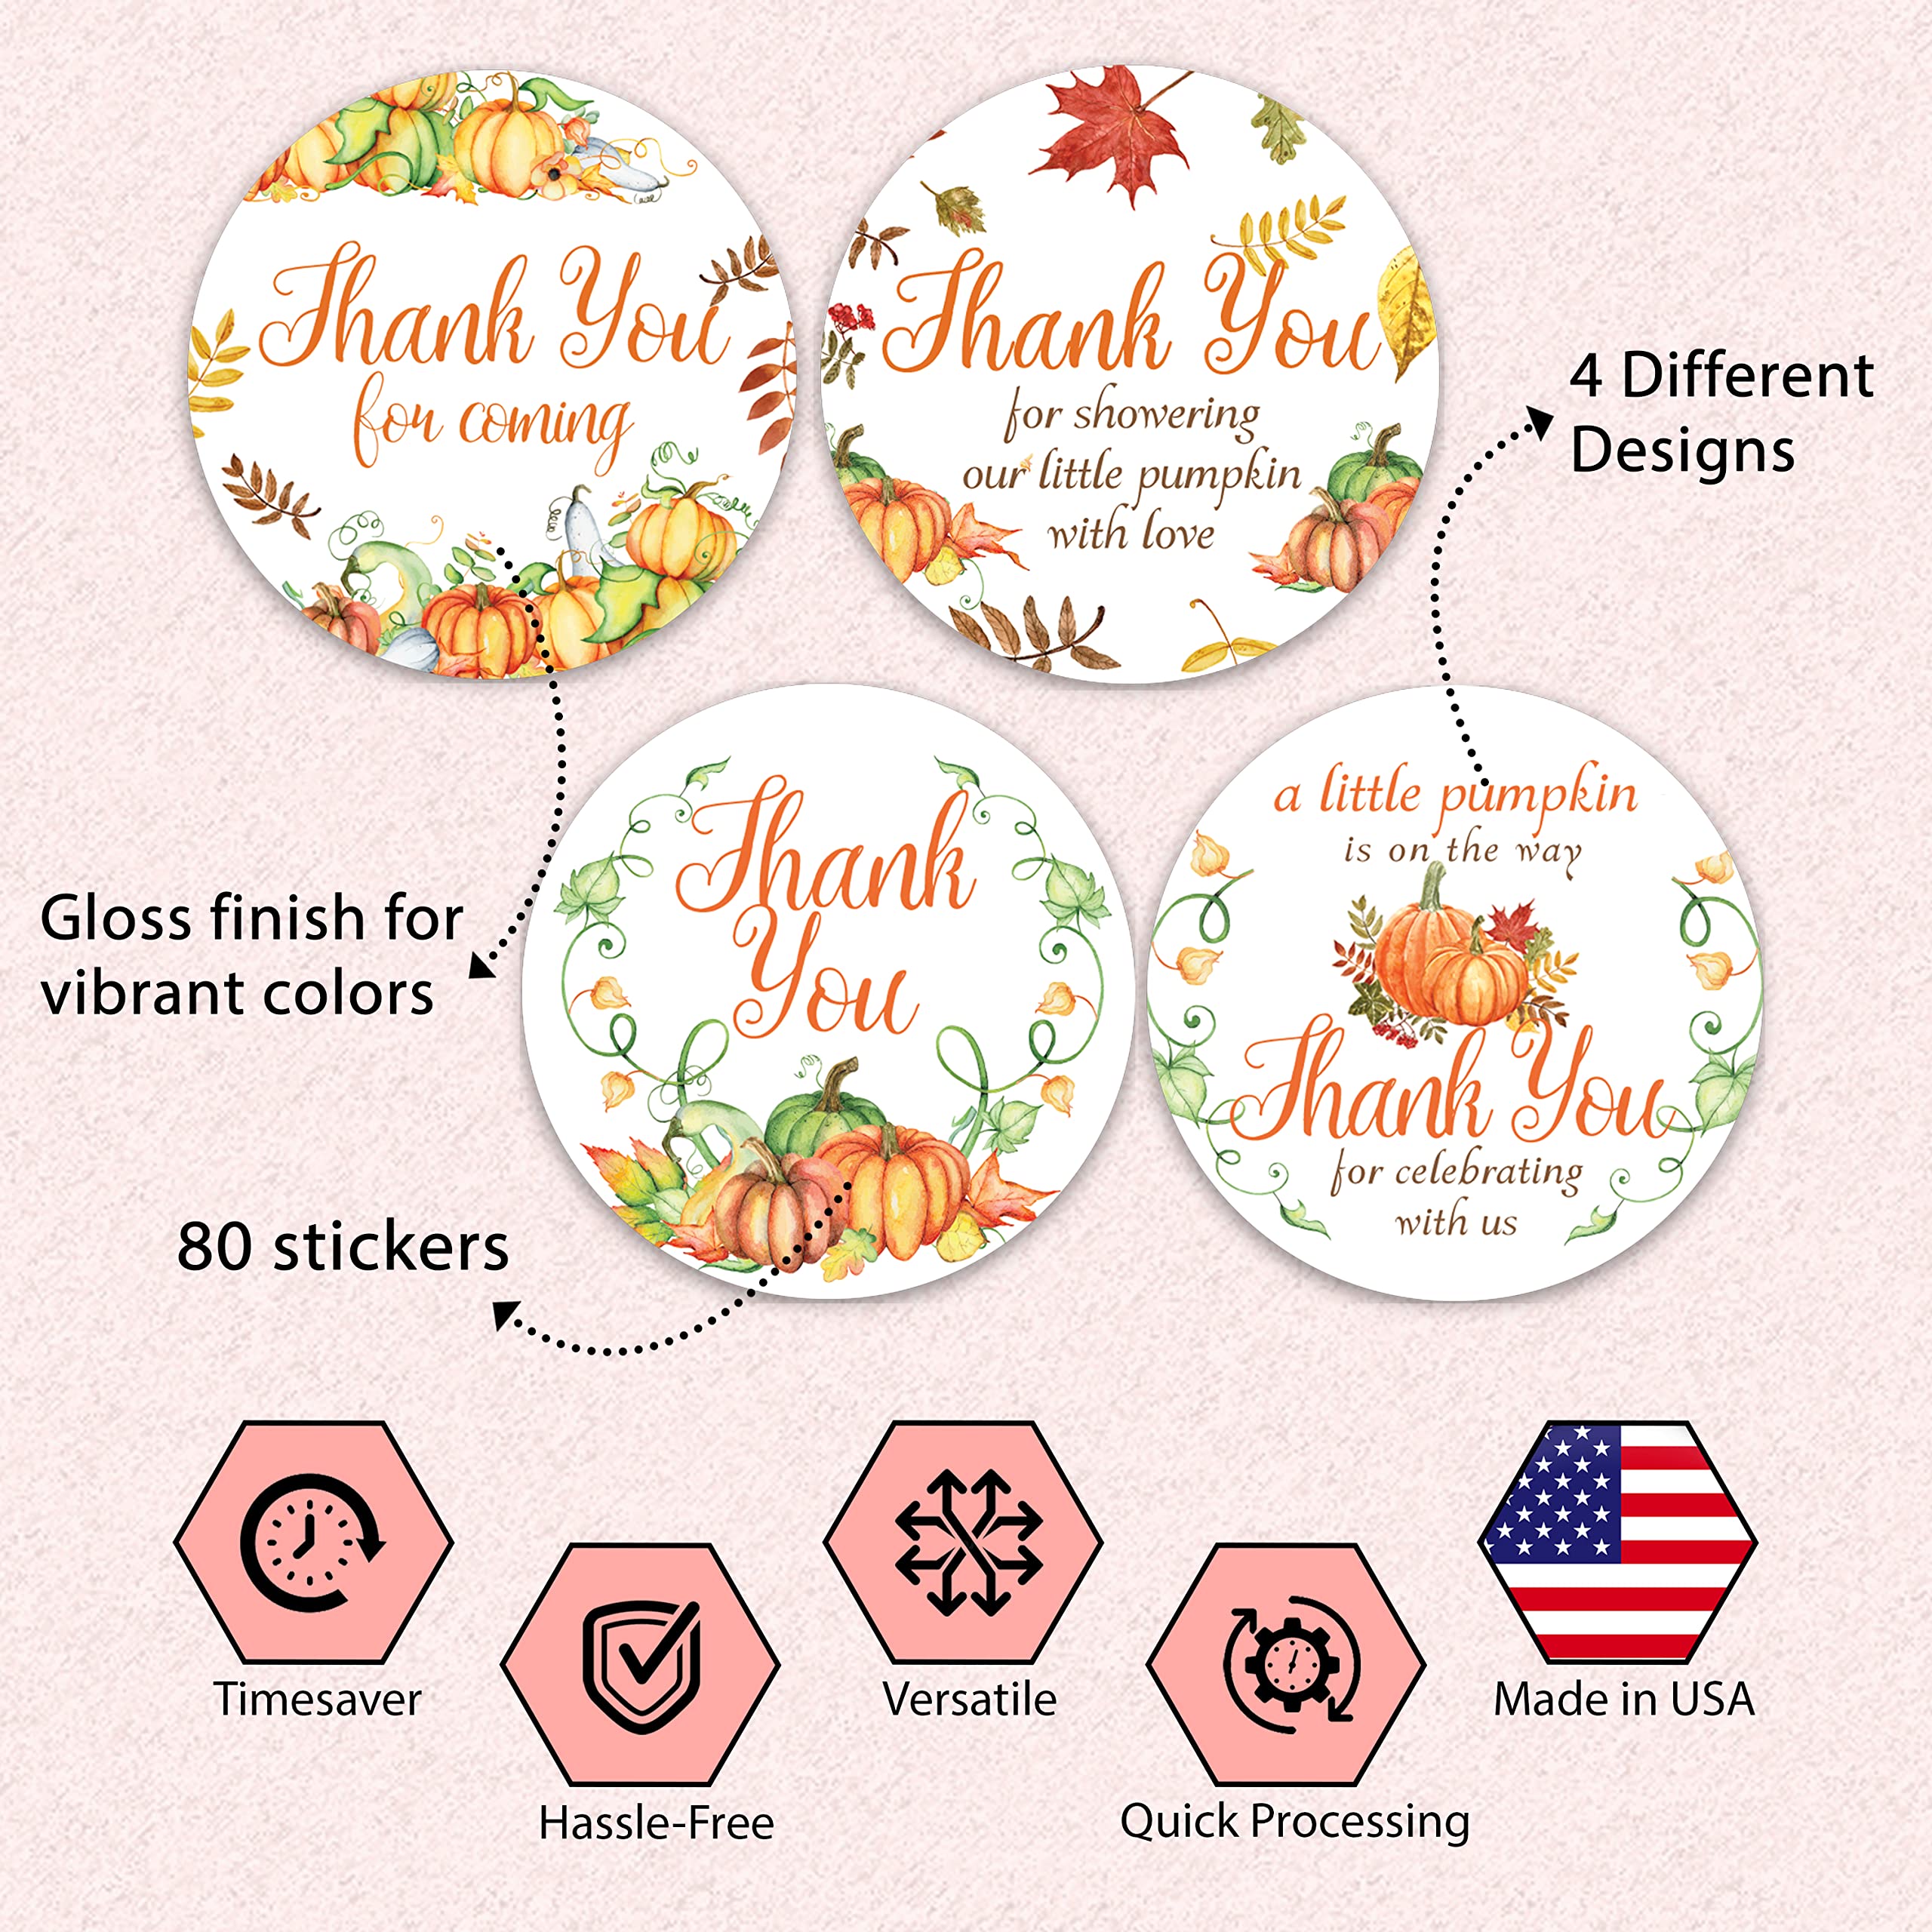 Thank You Baby Shower Stickers - Set of 80 Thank You for Coming Stickers, Preprinted Bridal Shower stickers, Birthday Party Favor Sticker, Self Adhesive Flat Sheet 2 Inch Round Labels LemonTheme Party (Pumpkin)